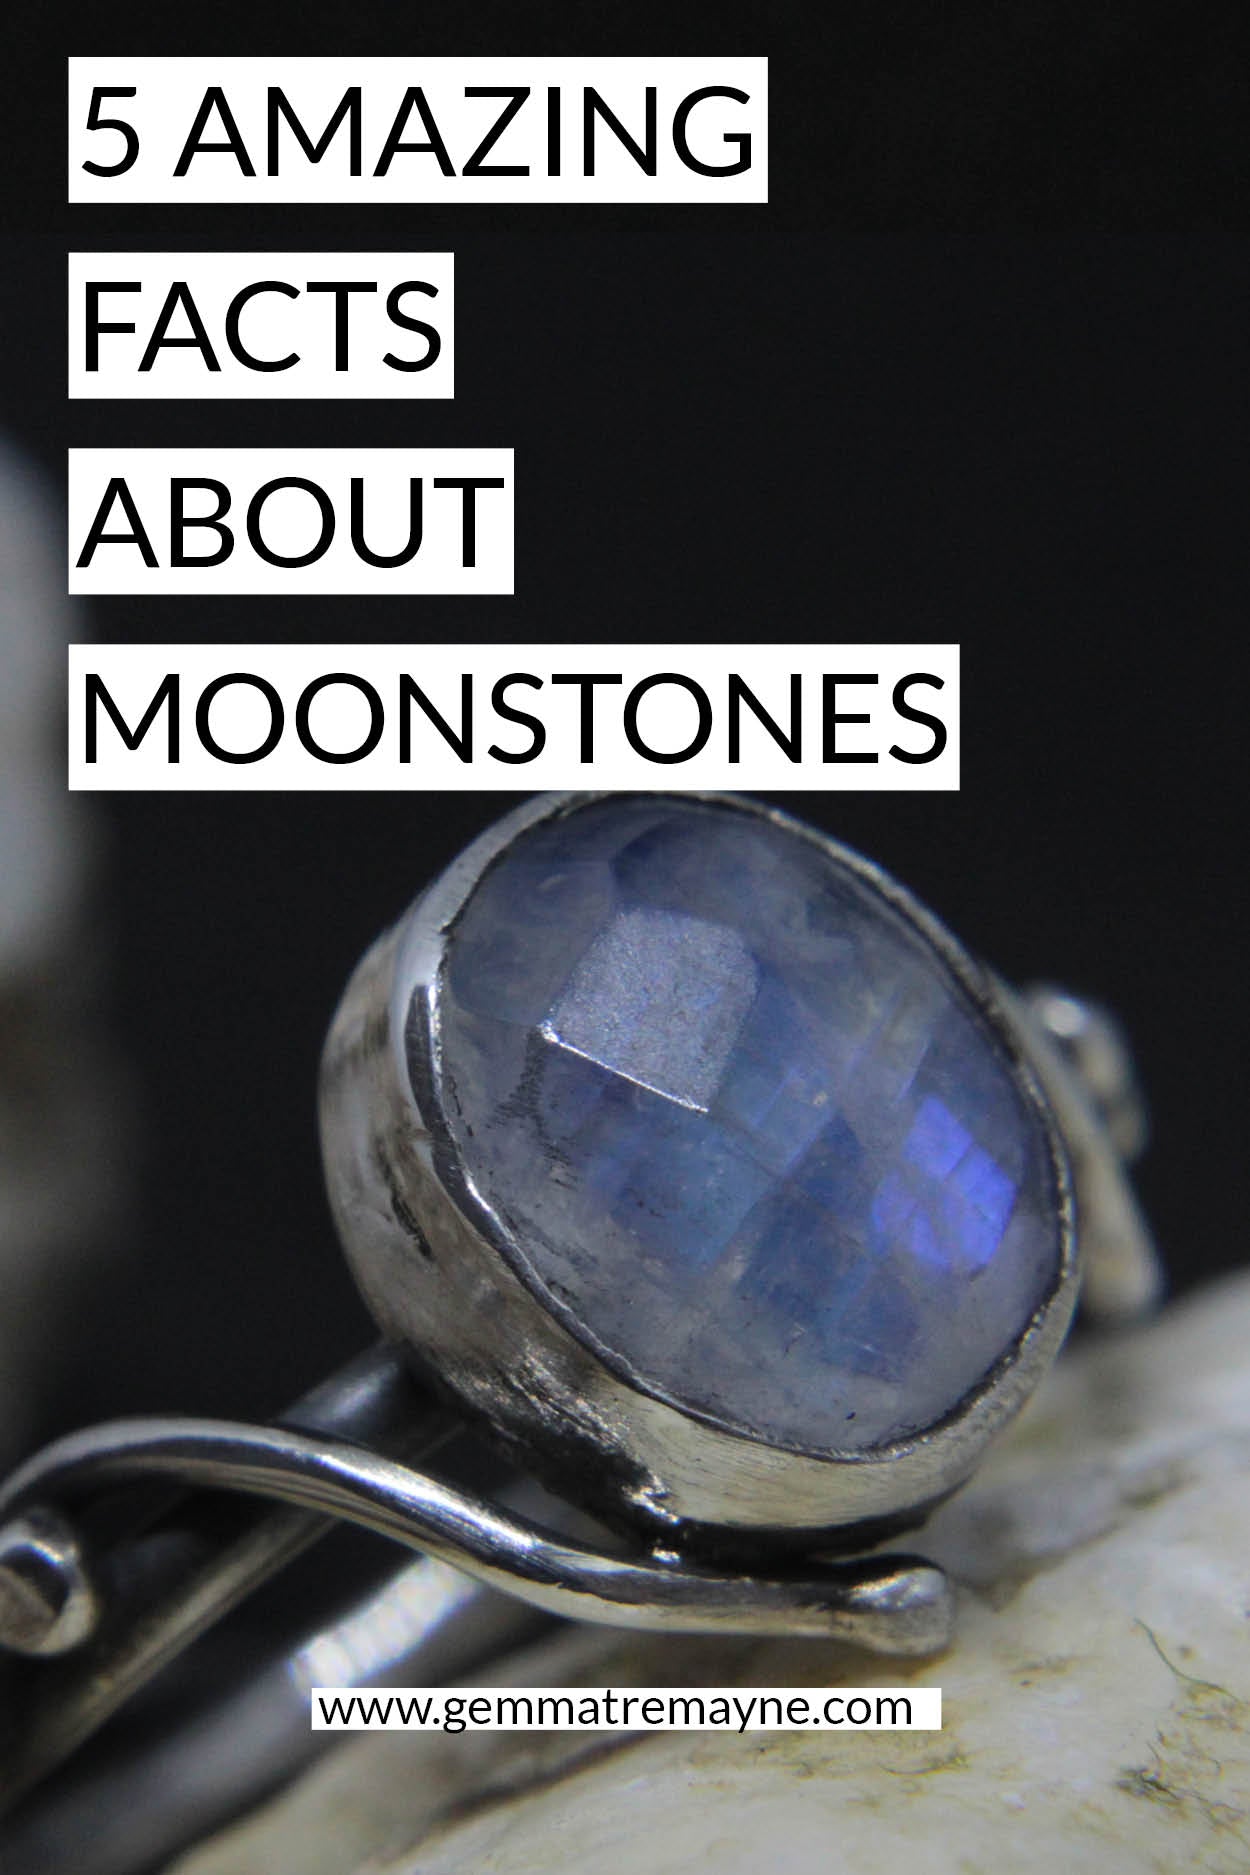 5 Amazing Facts About Moonstones